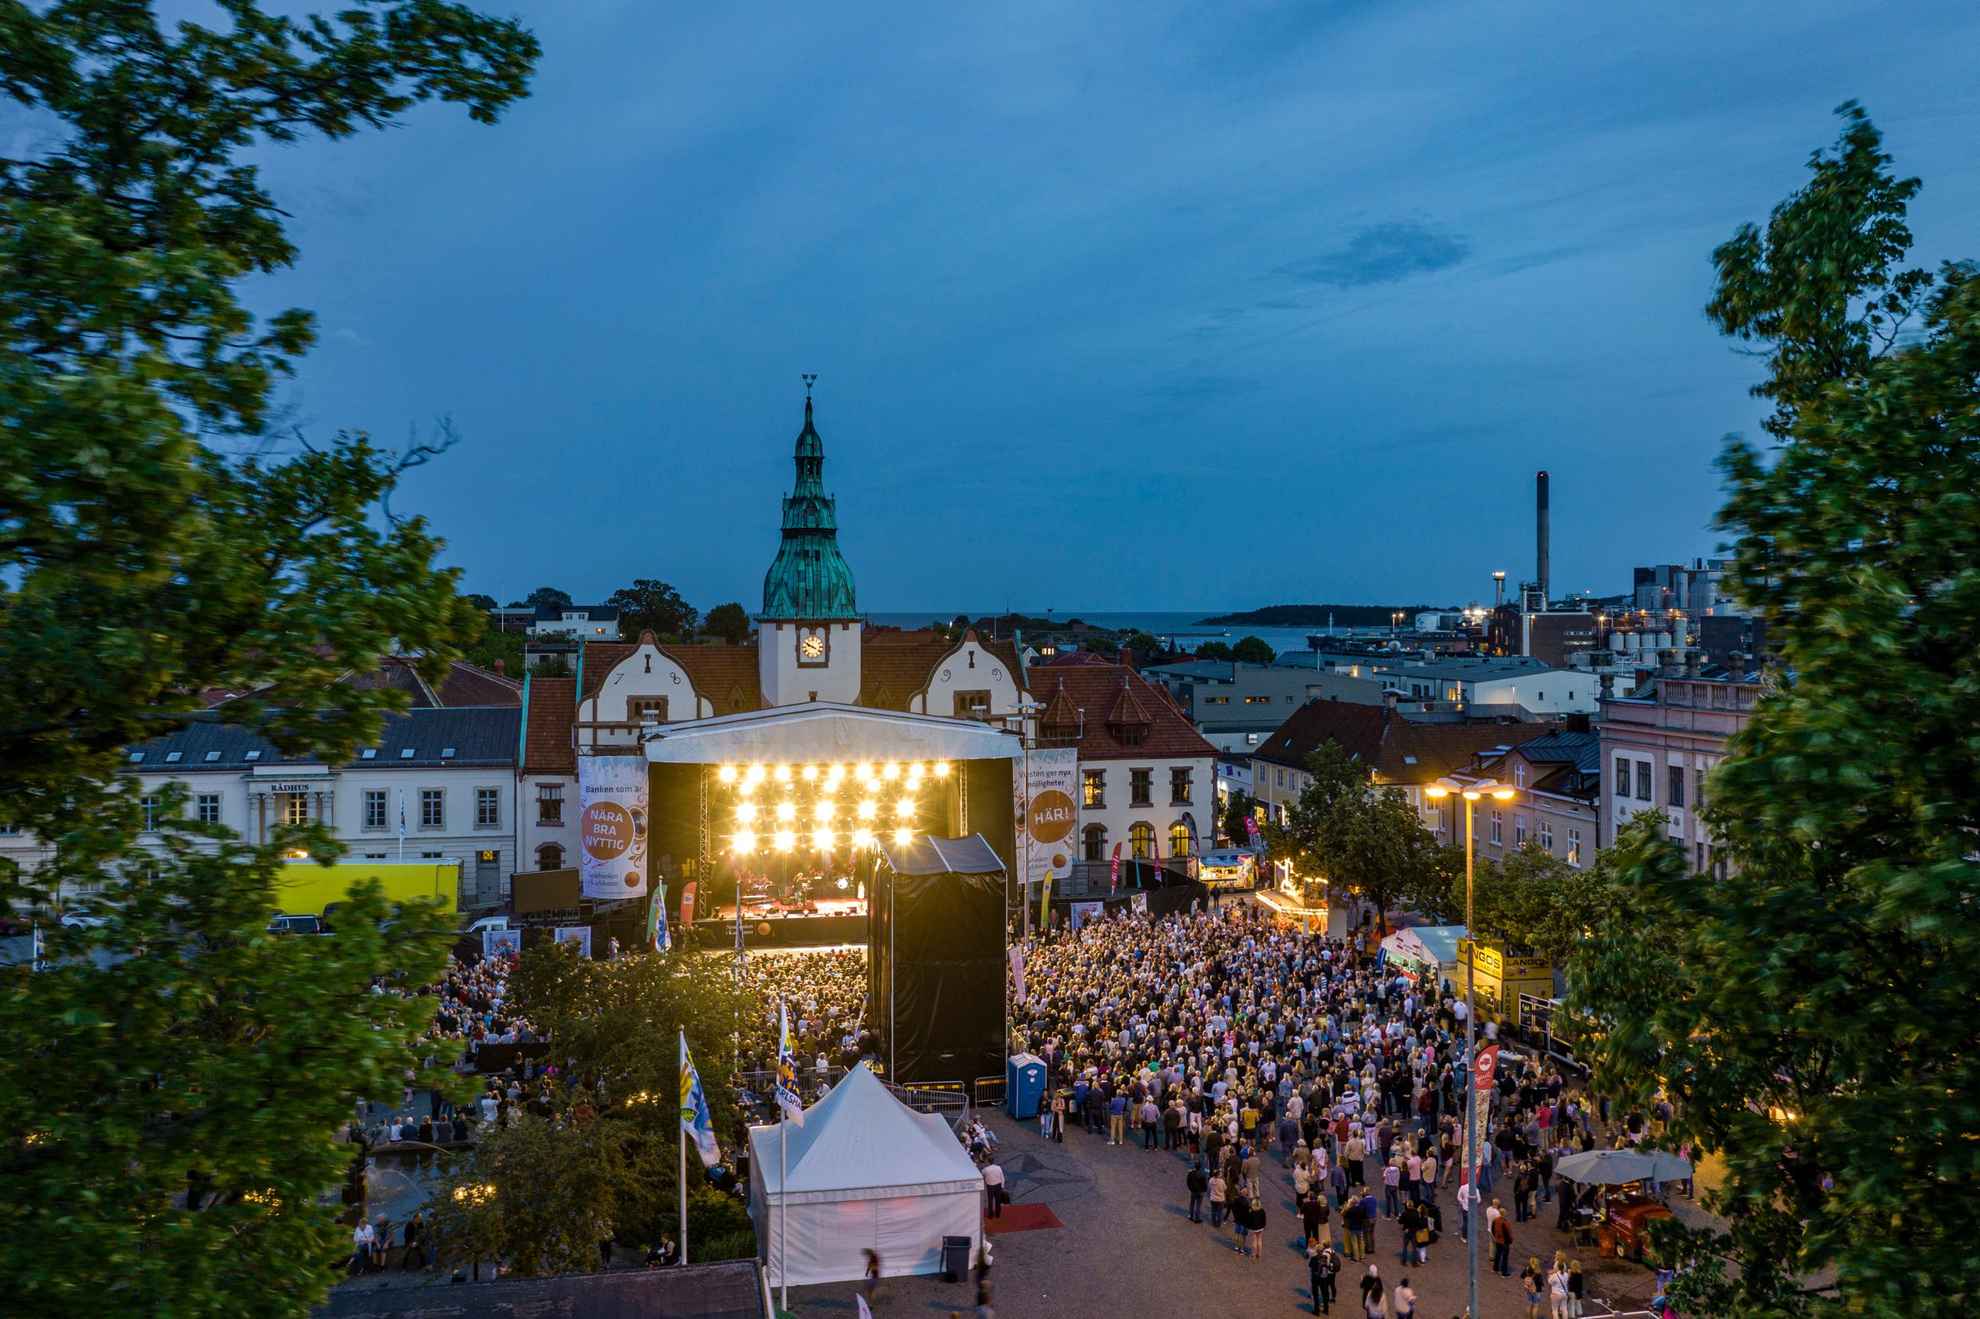 A festival area in a small city during a well-visited evening concert.